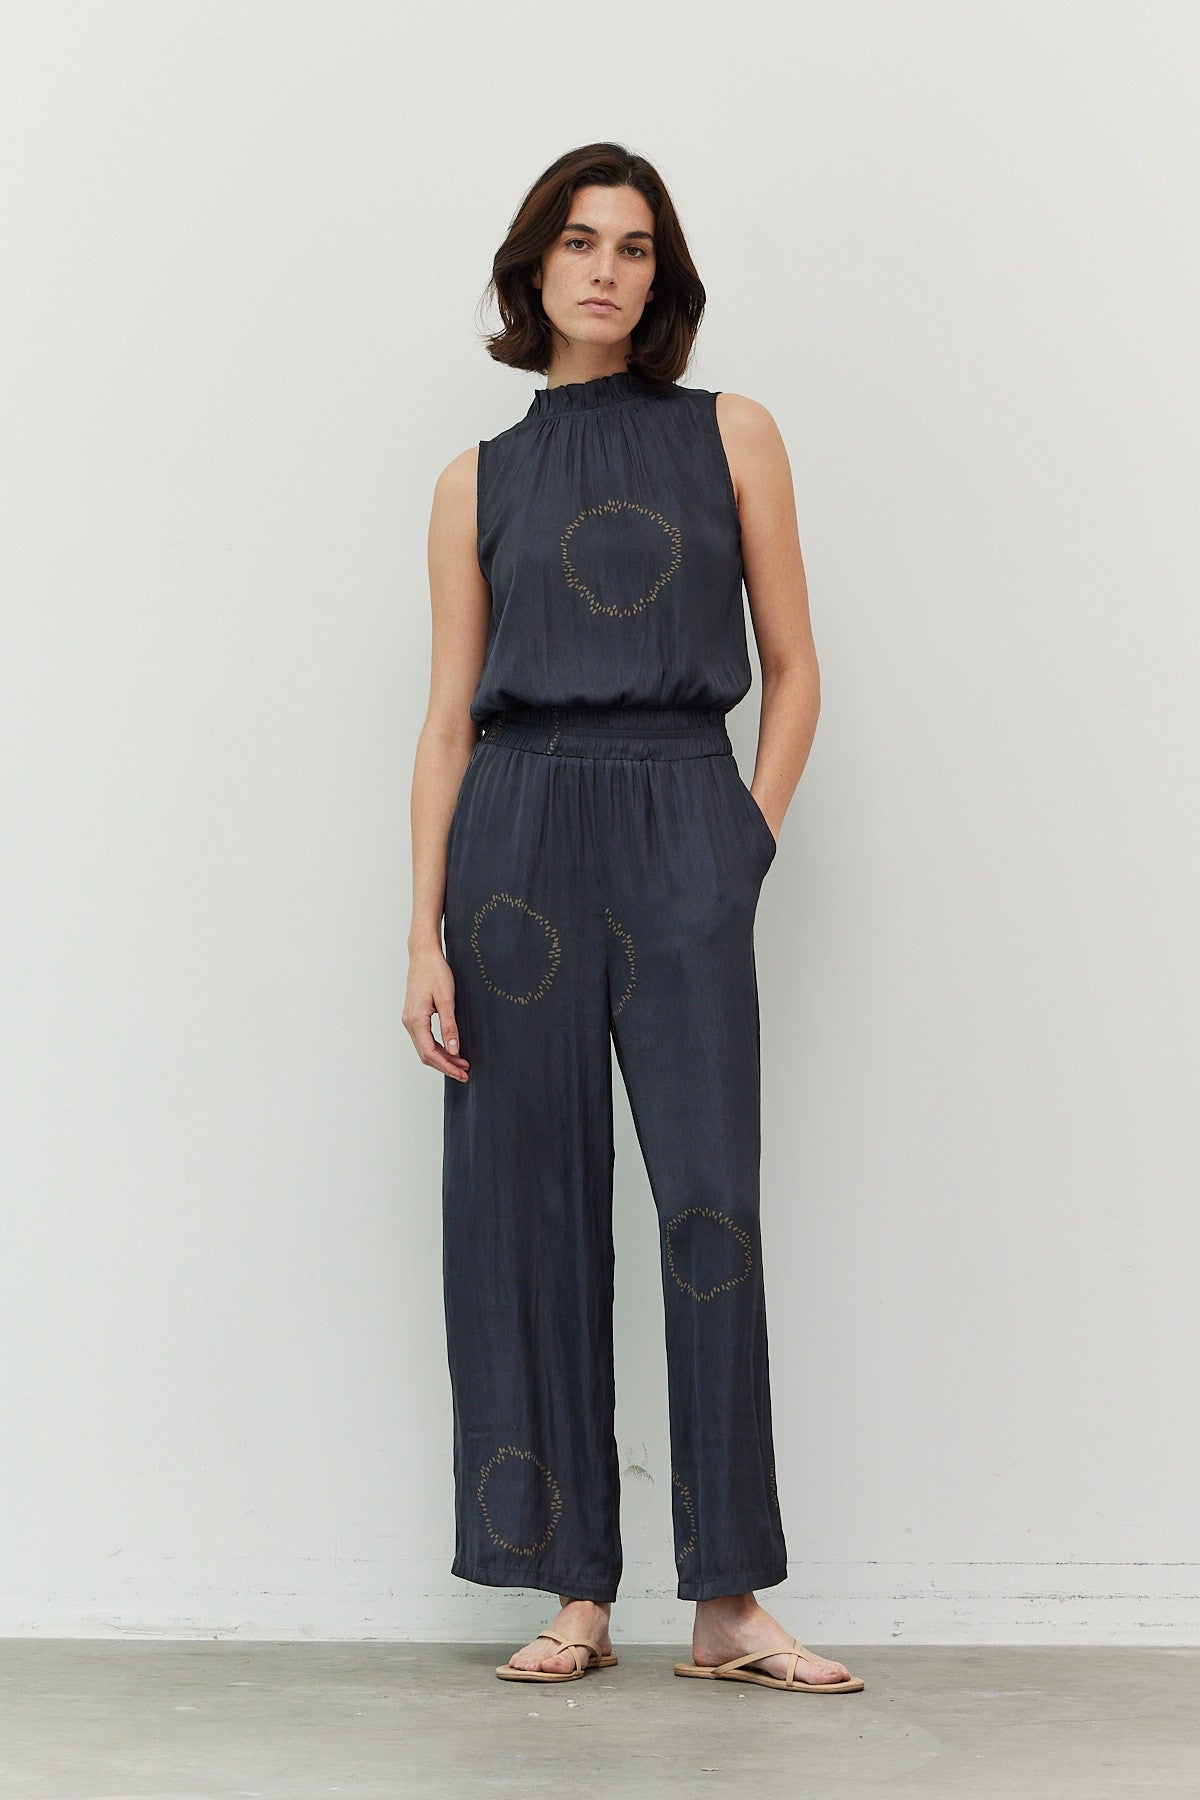 DOTTED CIRCLE PRINTED SATIN JUMPSUIT